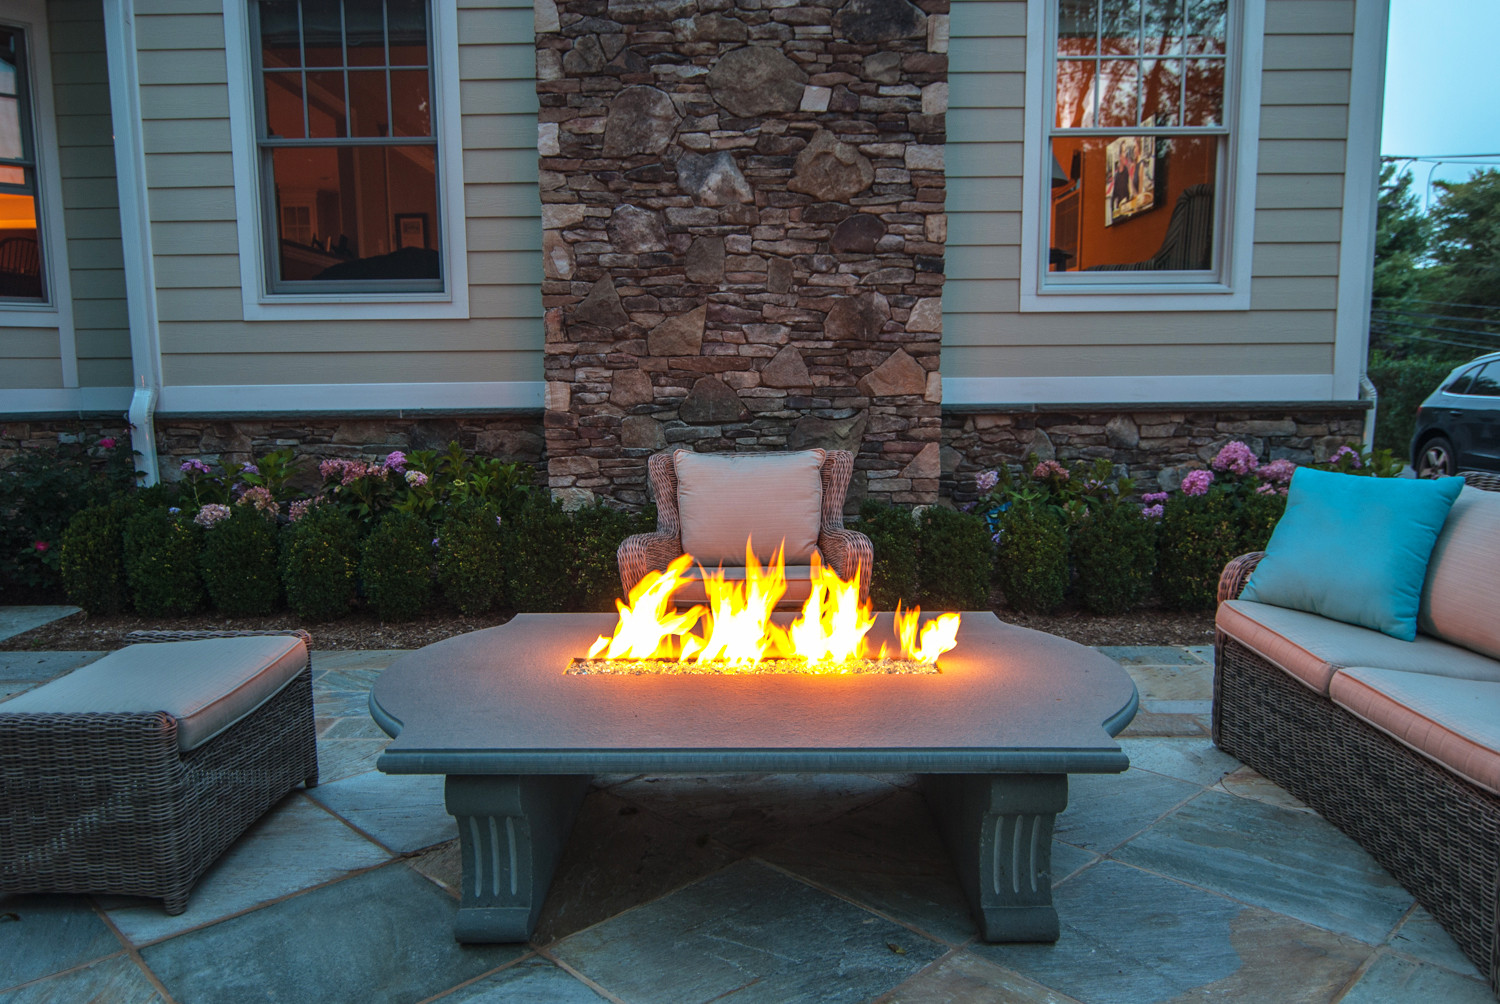 Fireplace Fire Pit
 New Outdoor Fire Pit & Fireplace Bergen County NJ